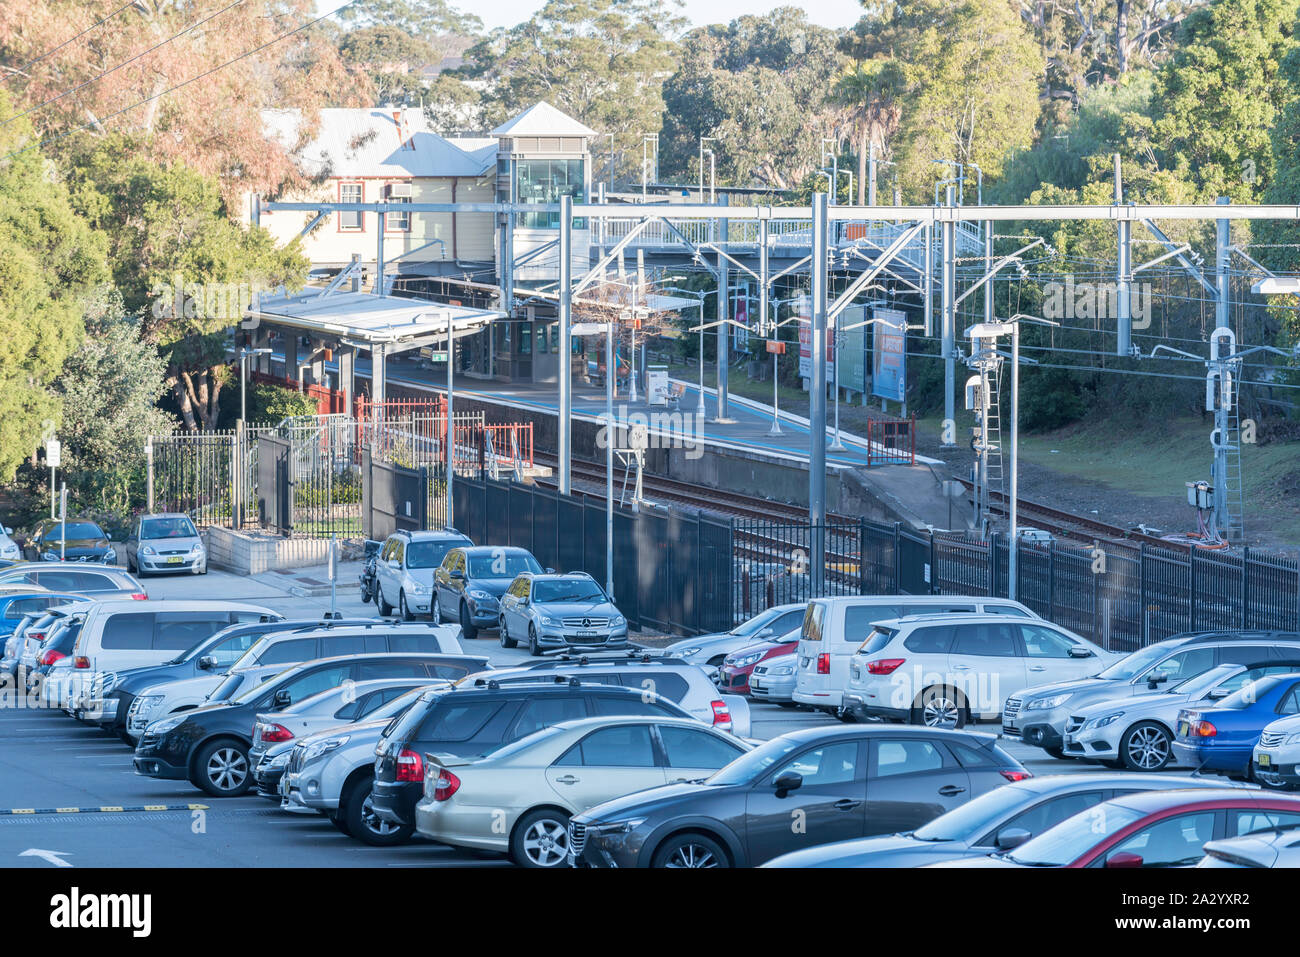 A railway station car park on the eastern side of Gordon Station on Sydney's north shore, New South Wales, Australia Stock Photo